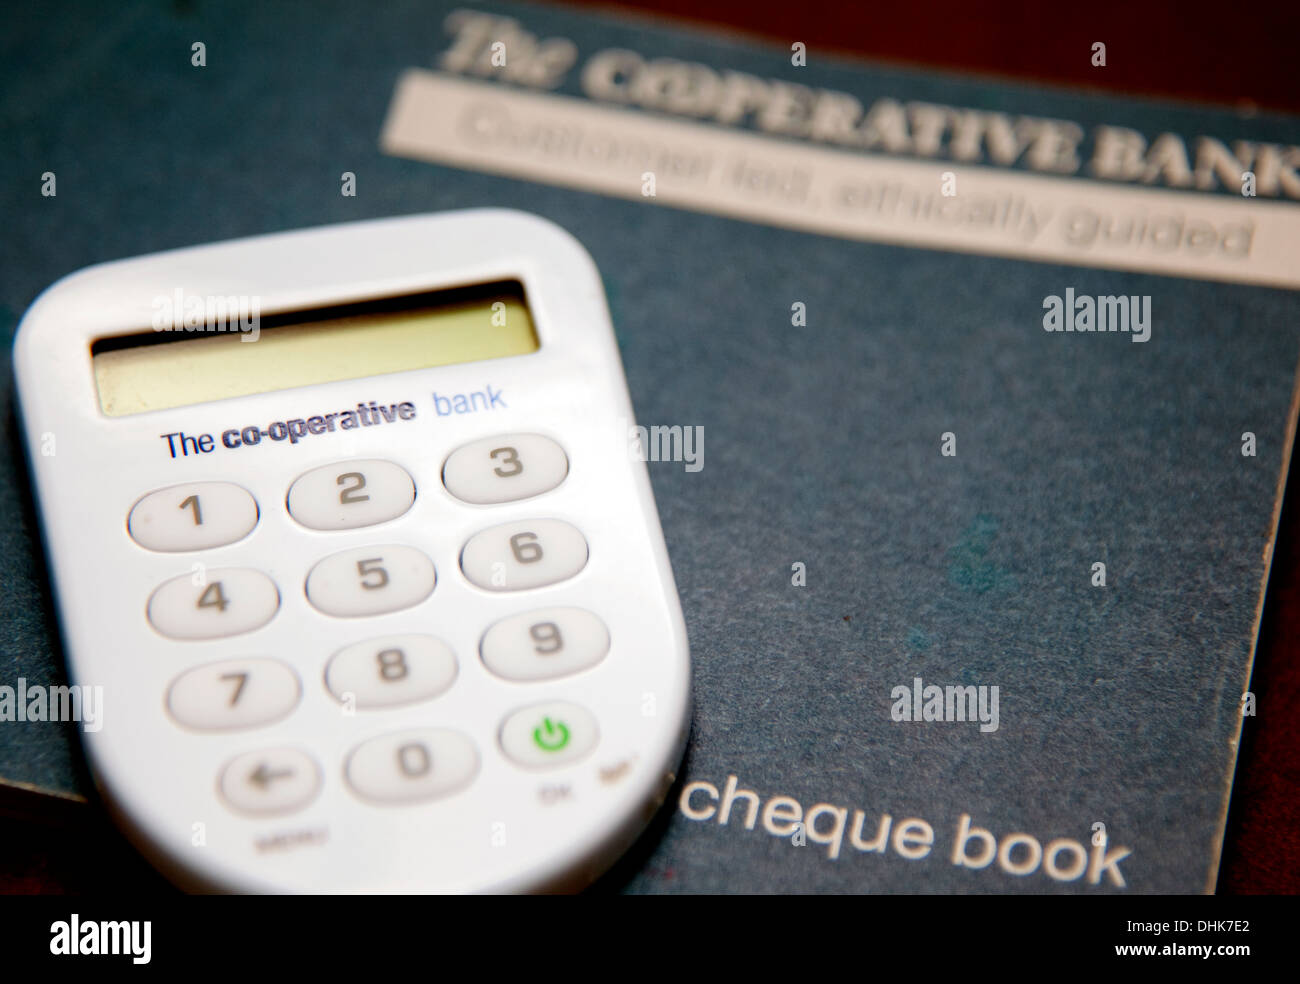 Co-operative Bank security code generator and chequebook, London Stock Photo